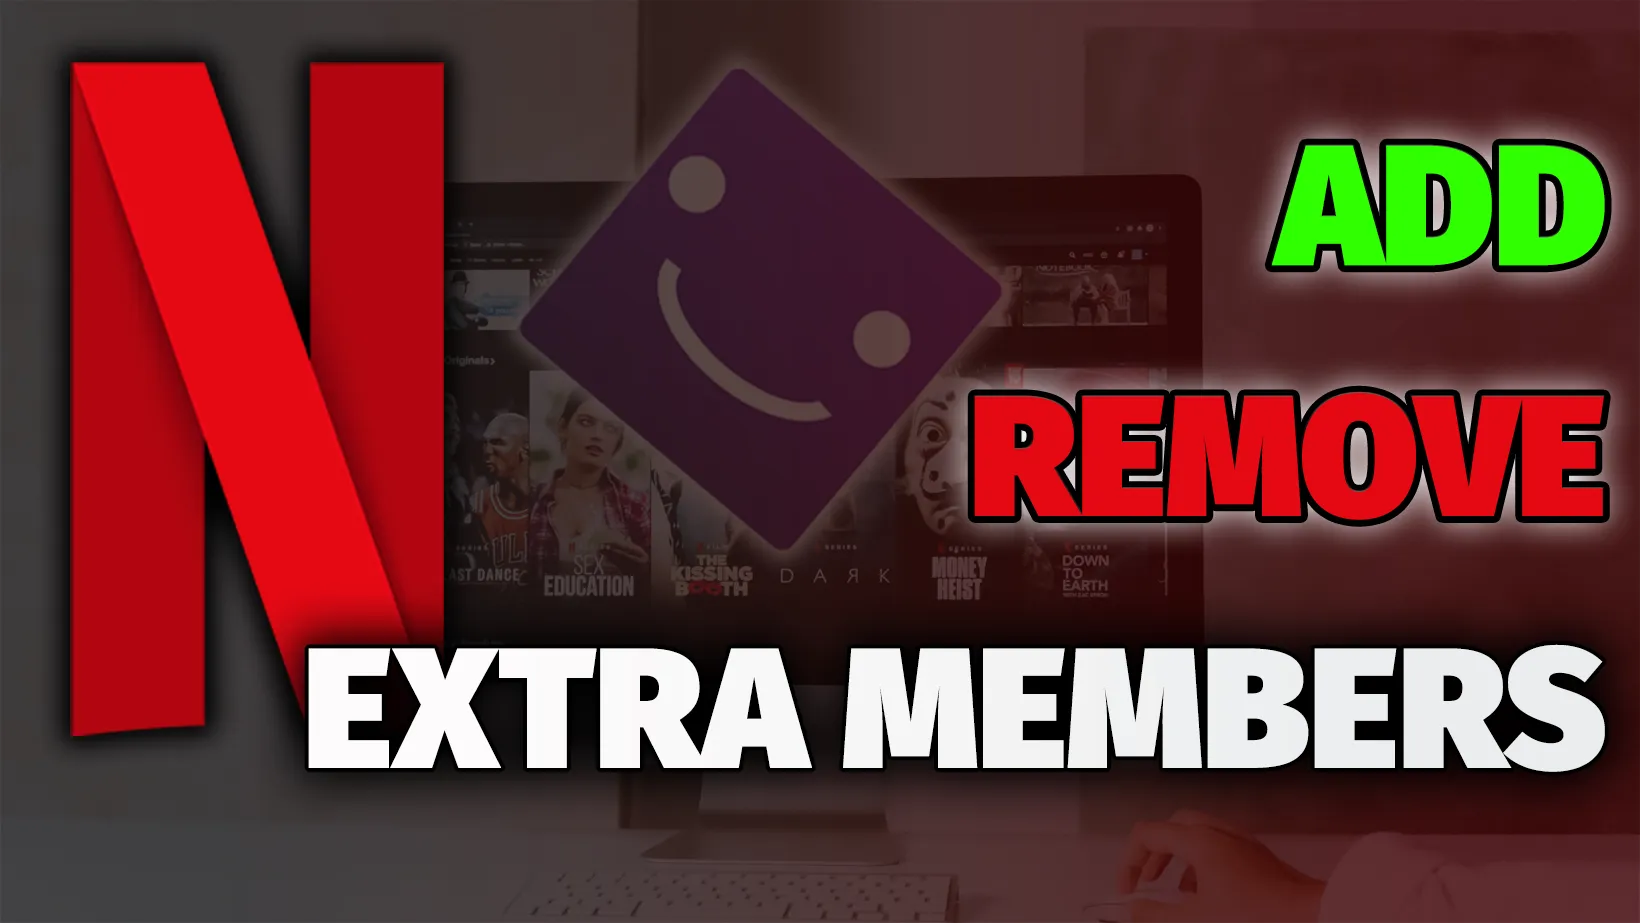 How to Add Extra Members on Netflix